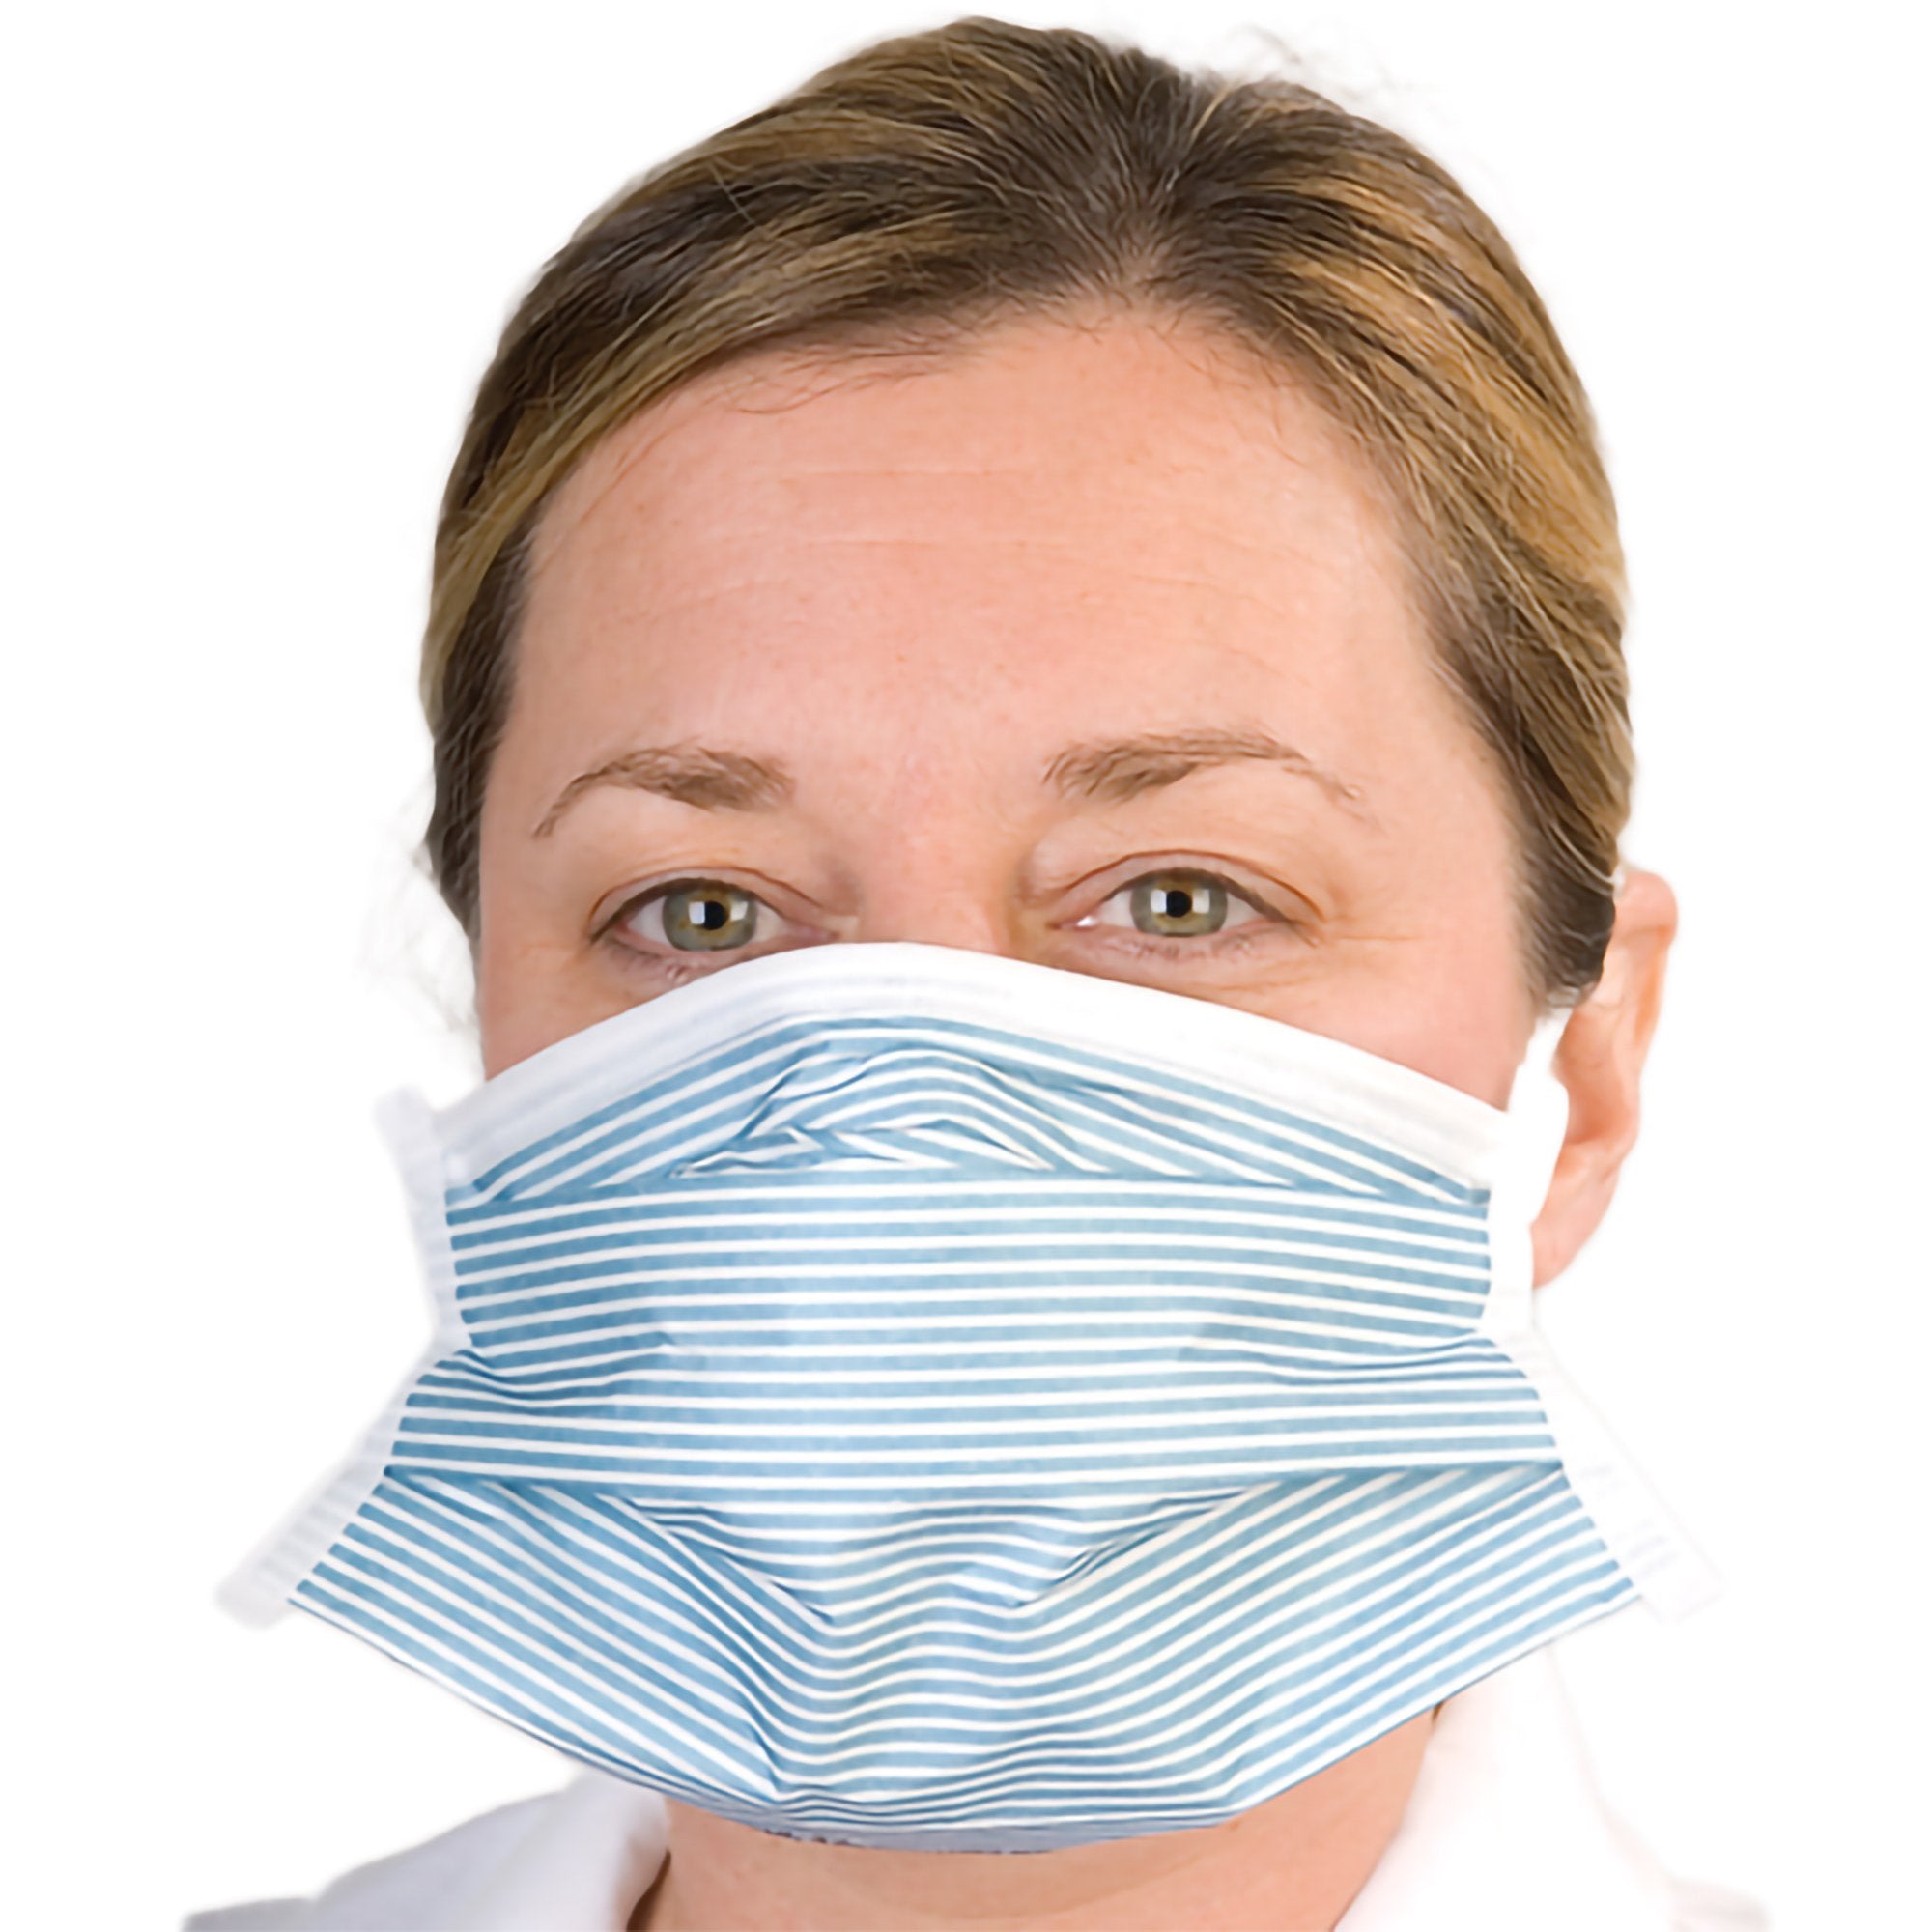 Particulate Respirator / Surgical Mask Isolator Plus Medical N95 Chamber Elastic Strap One Size Fits Most Blue / White Stripe NonSterile Not Rated Adult